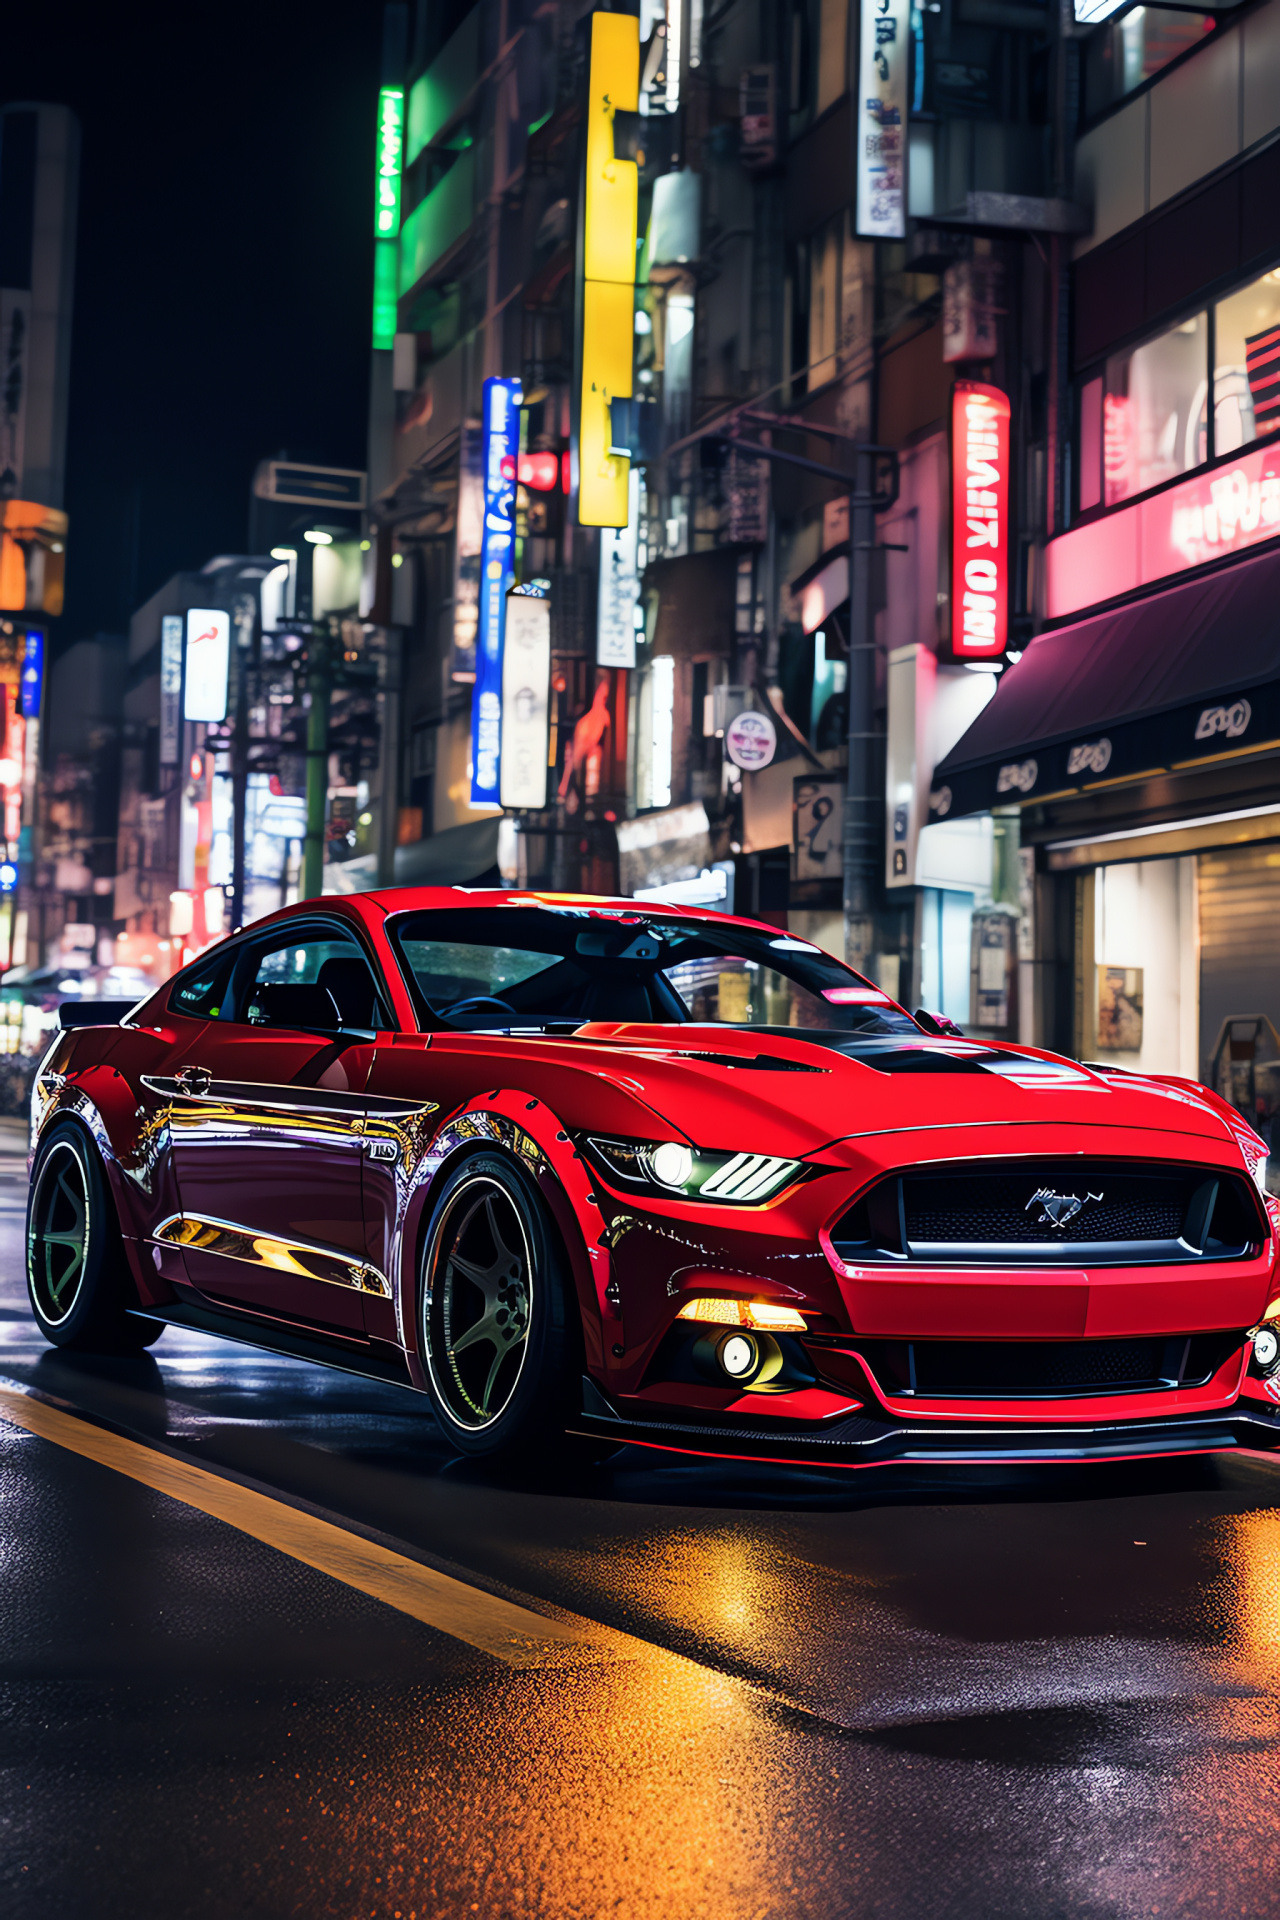 Ford Mustang GT, Modified sports car, Tokyo racing, Dynamic motion, Nighttime cityscape, HD Phone Image